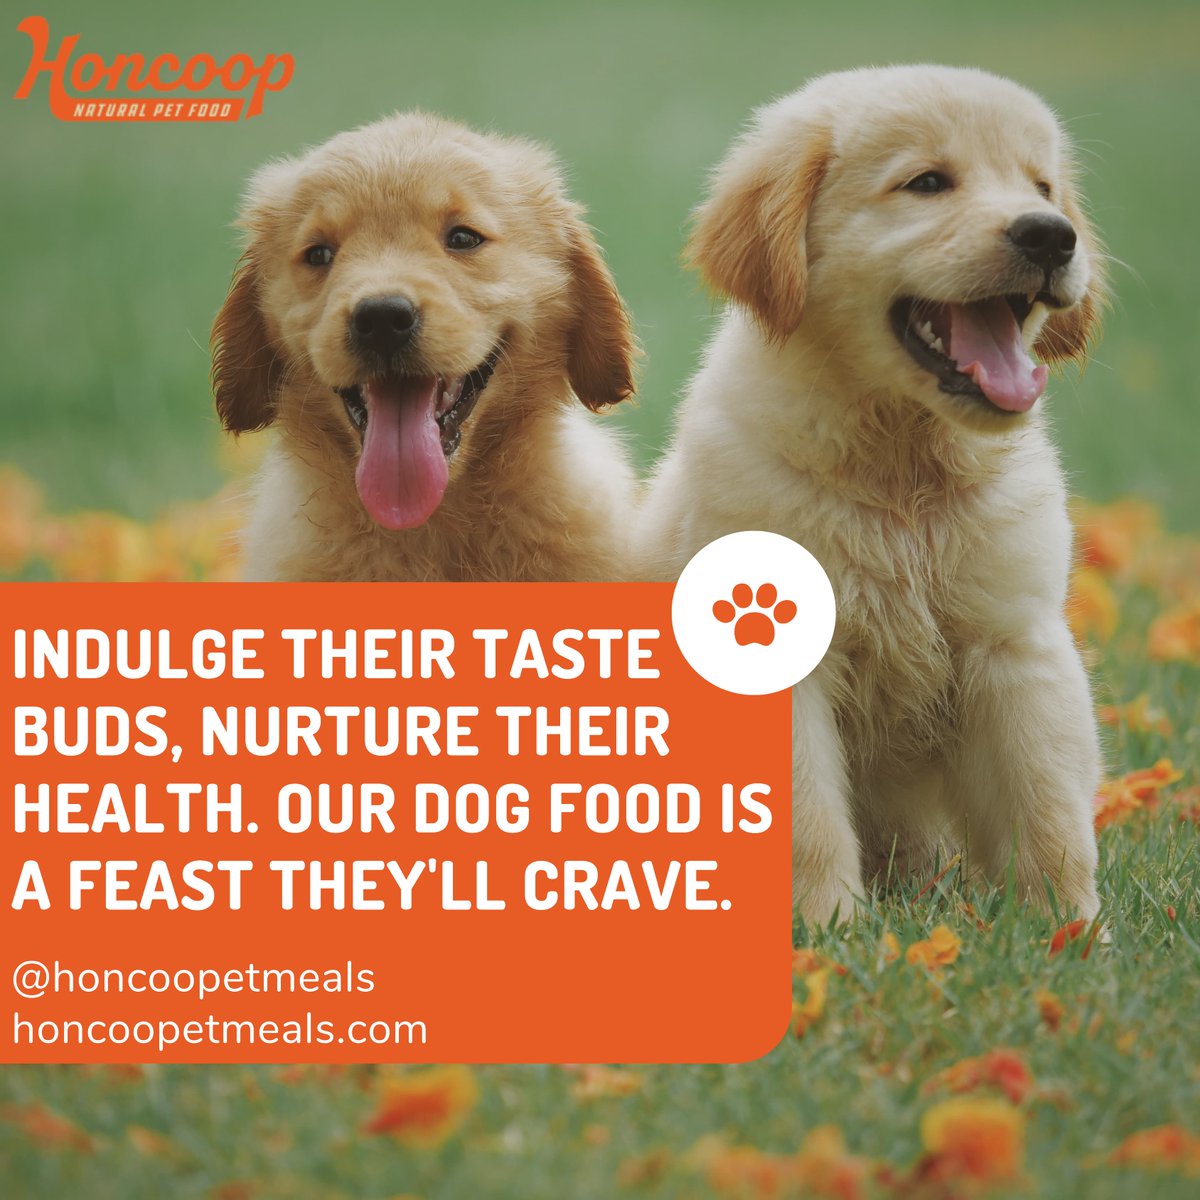 #dogs #doghealth #doghealthtips #dogadvice #happypet #pethomecare #petloversclub #dogfoodie #pooches